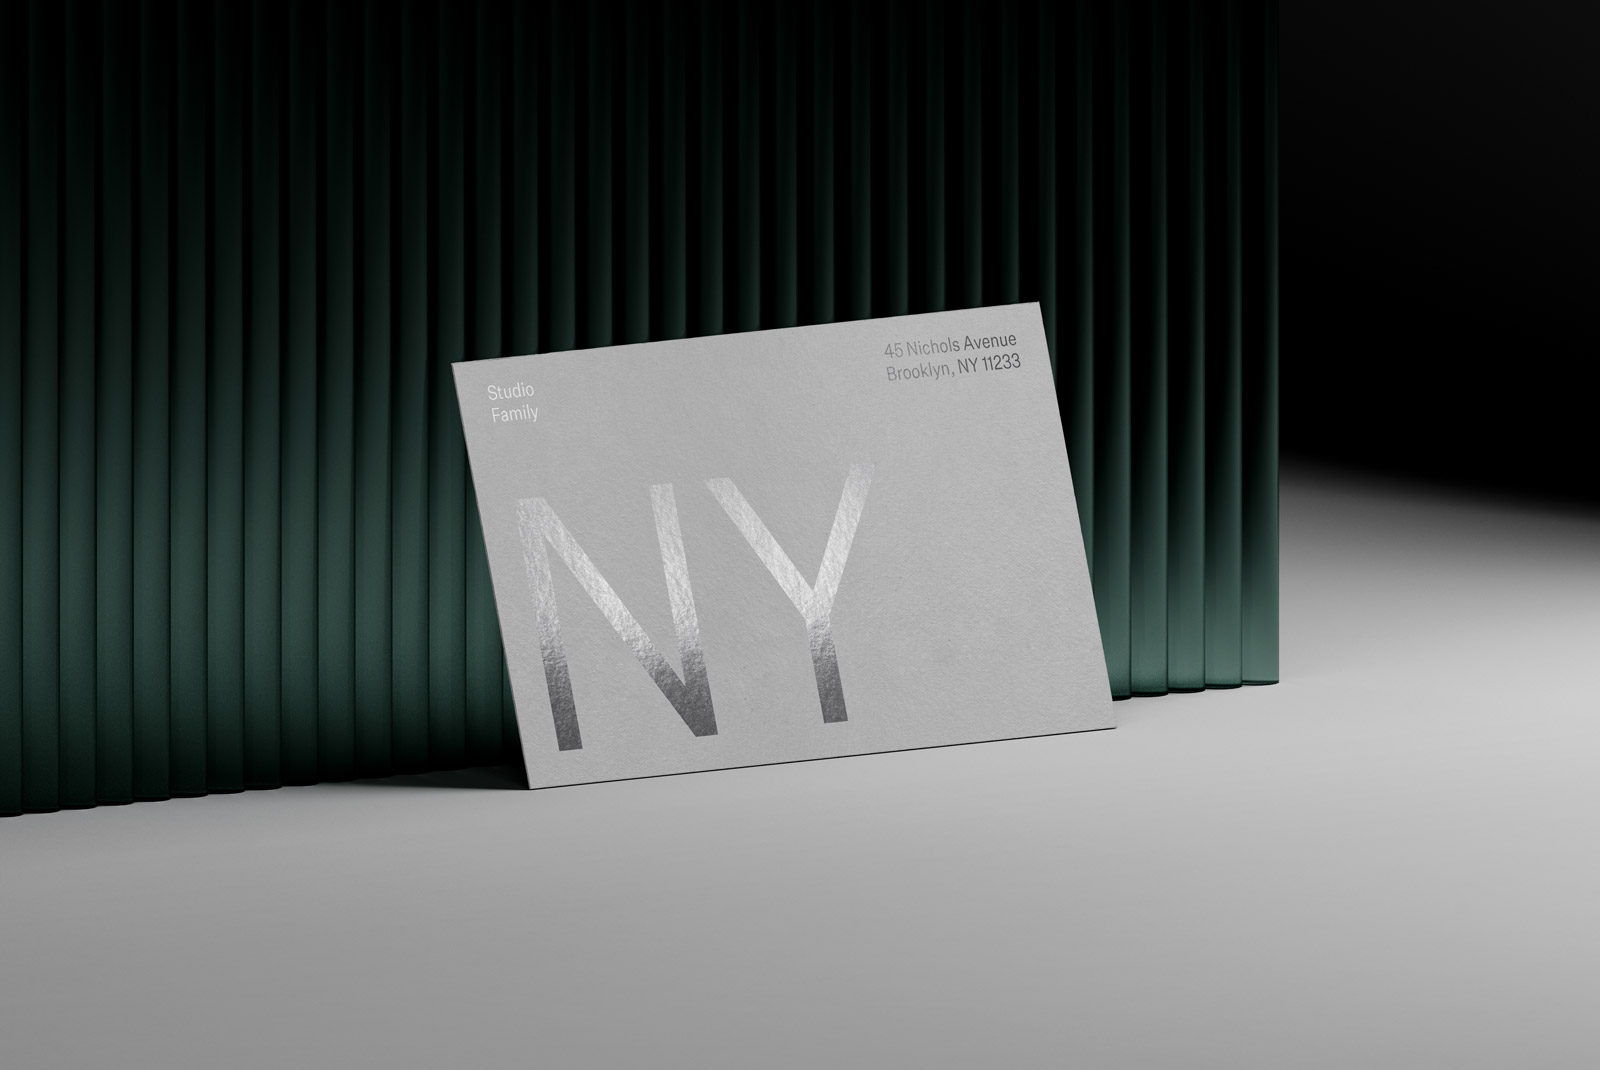 Elegant card mockup with textured design and bold NY lettering perfect for graphic presentations and designer portfolios.